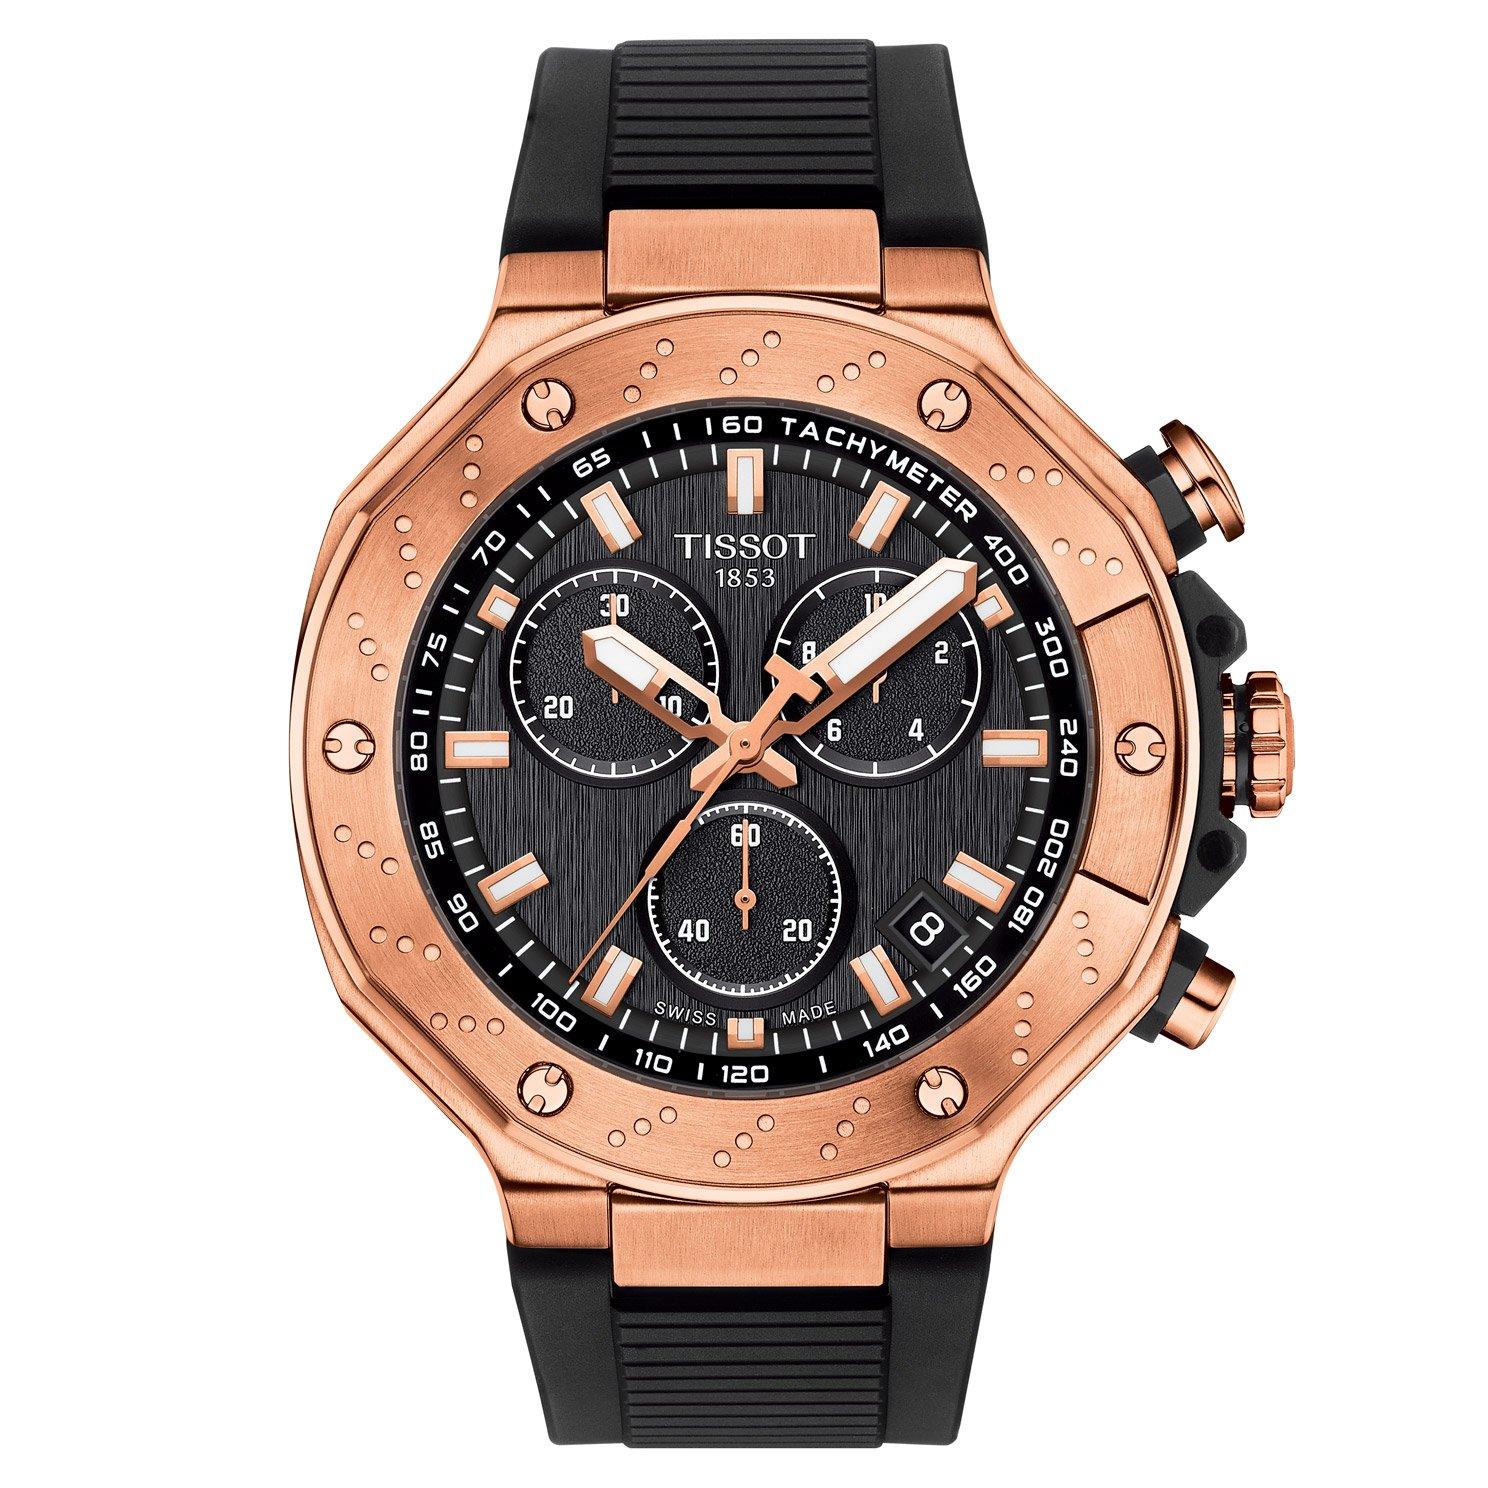 Tissot T-Race 45mm Chronograph Rose Gold Plated Men's Watch